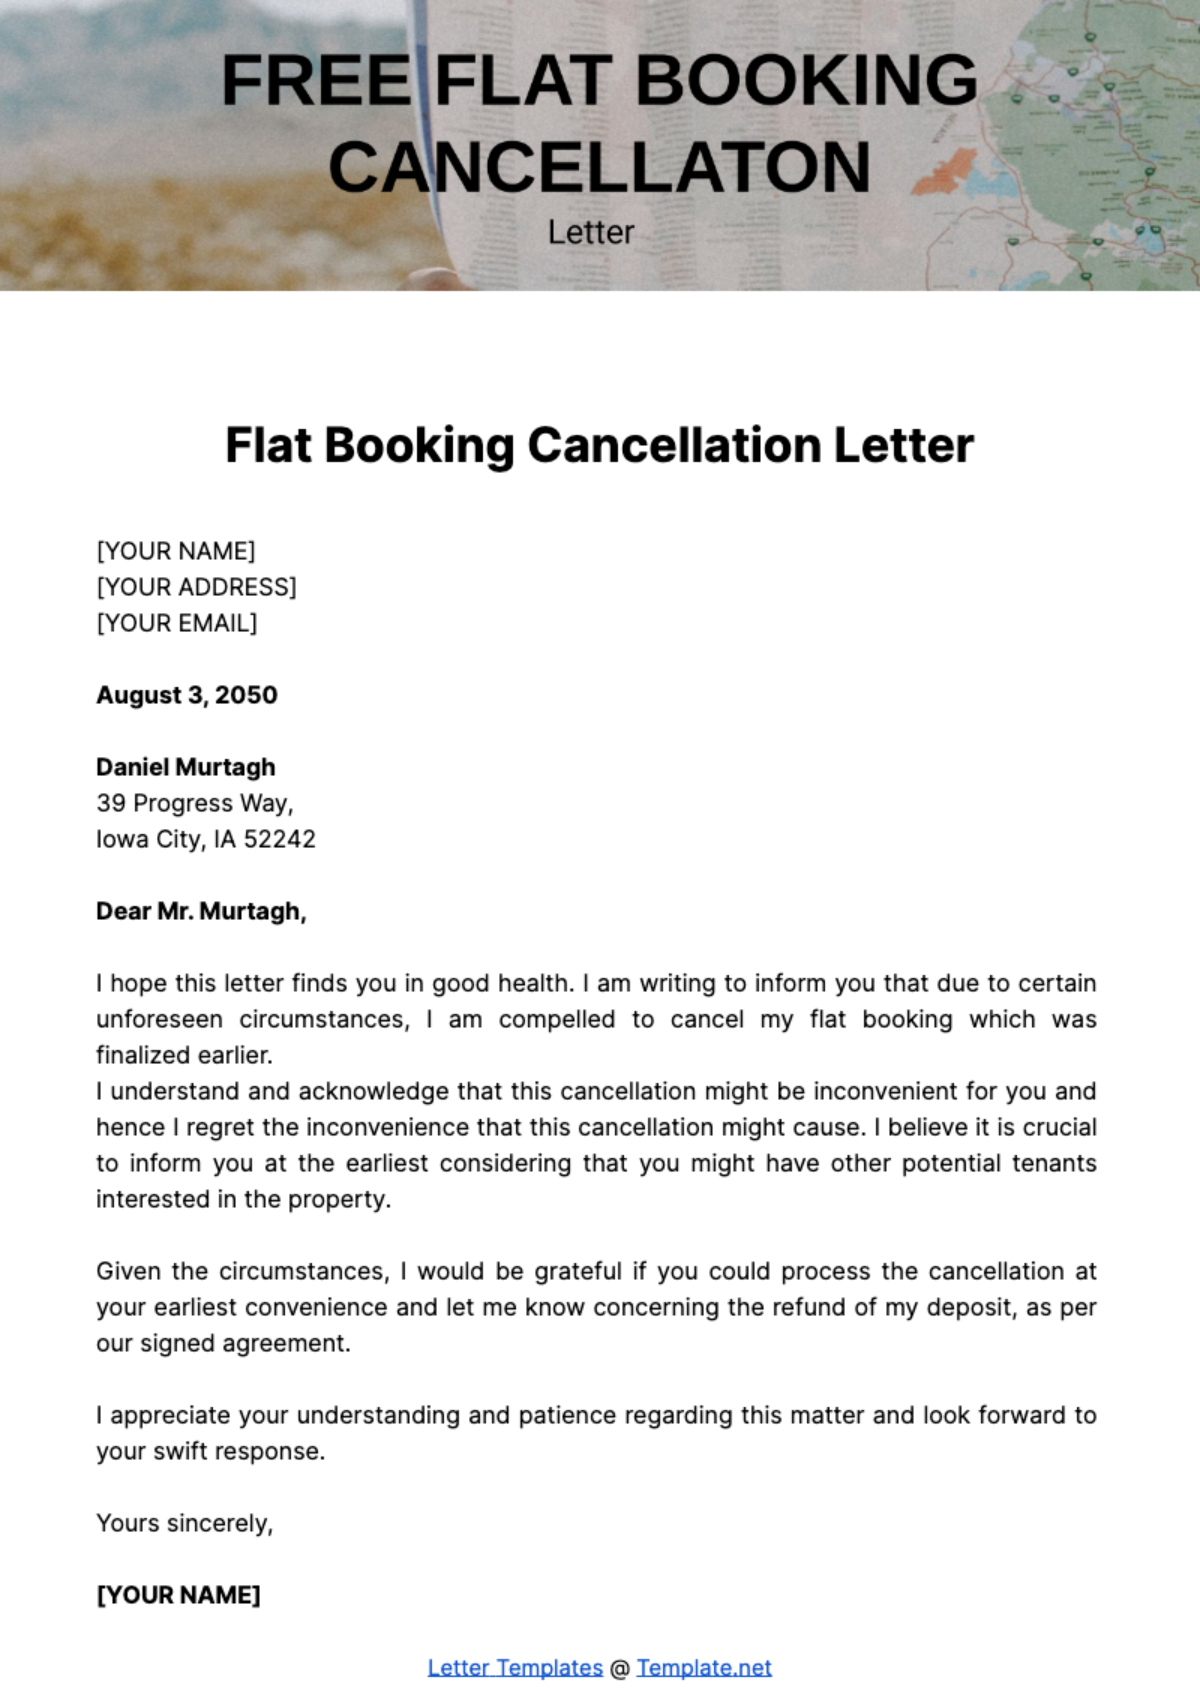 Free Flat Booking Cancellation Letter Template